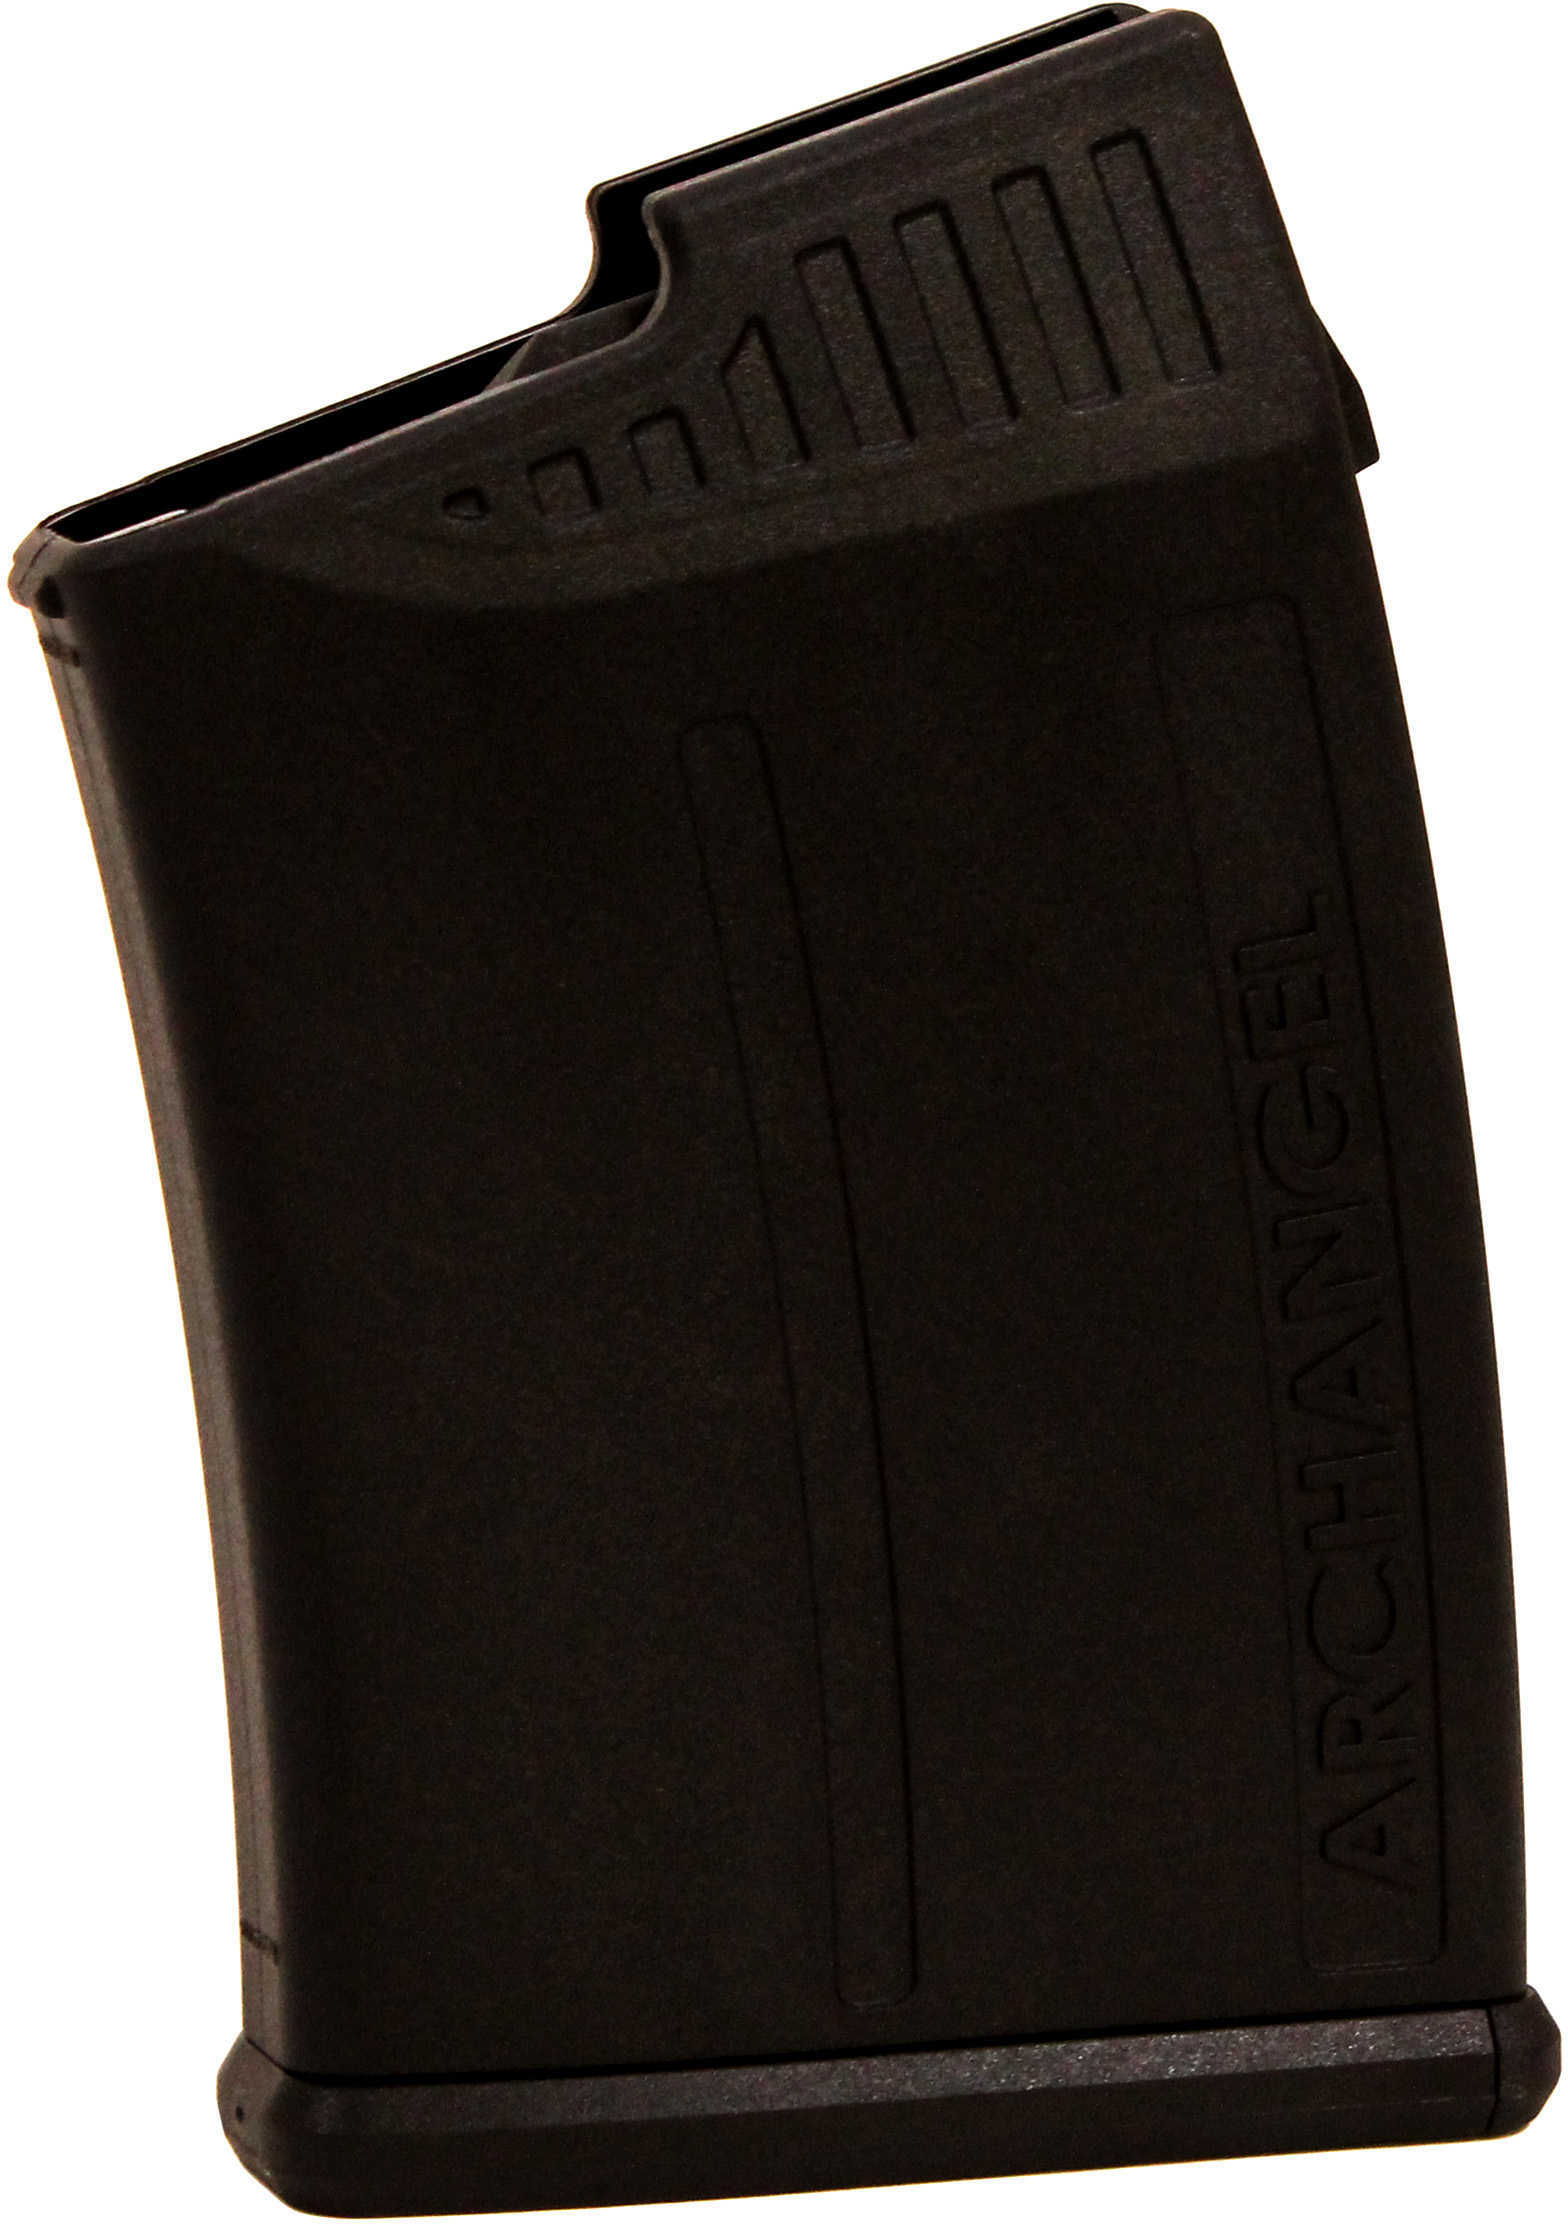 Promag Archangel 8mm Magazine For AA98 Stock (Maus-img-1